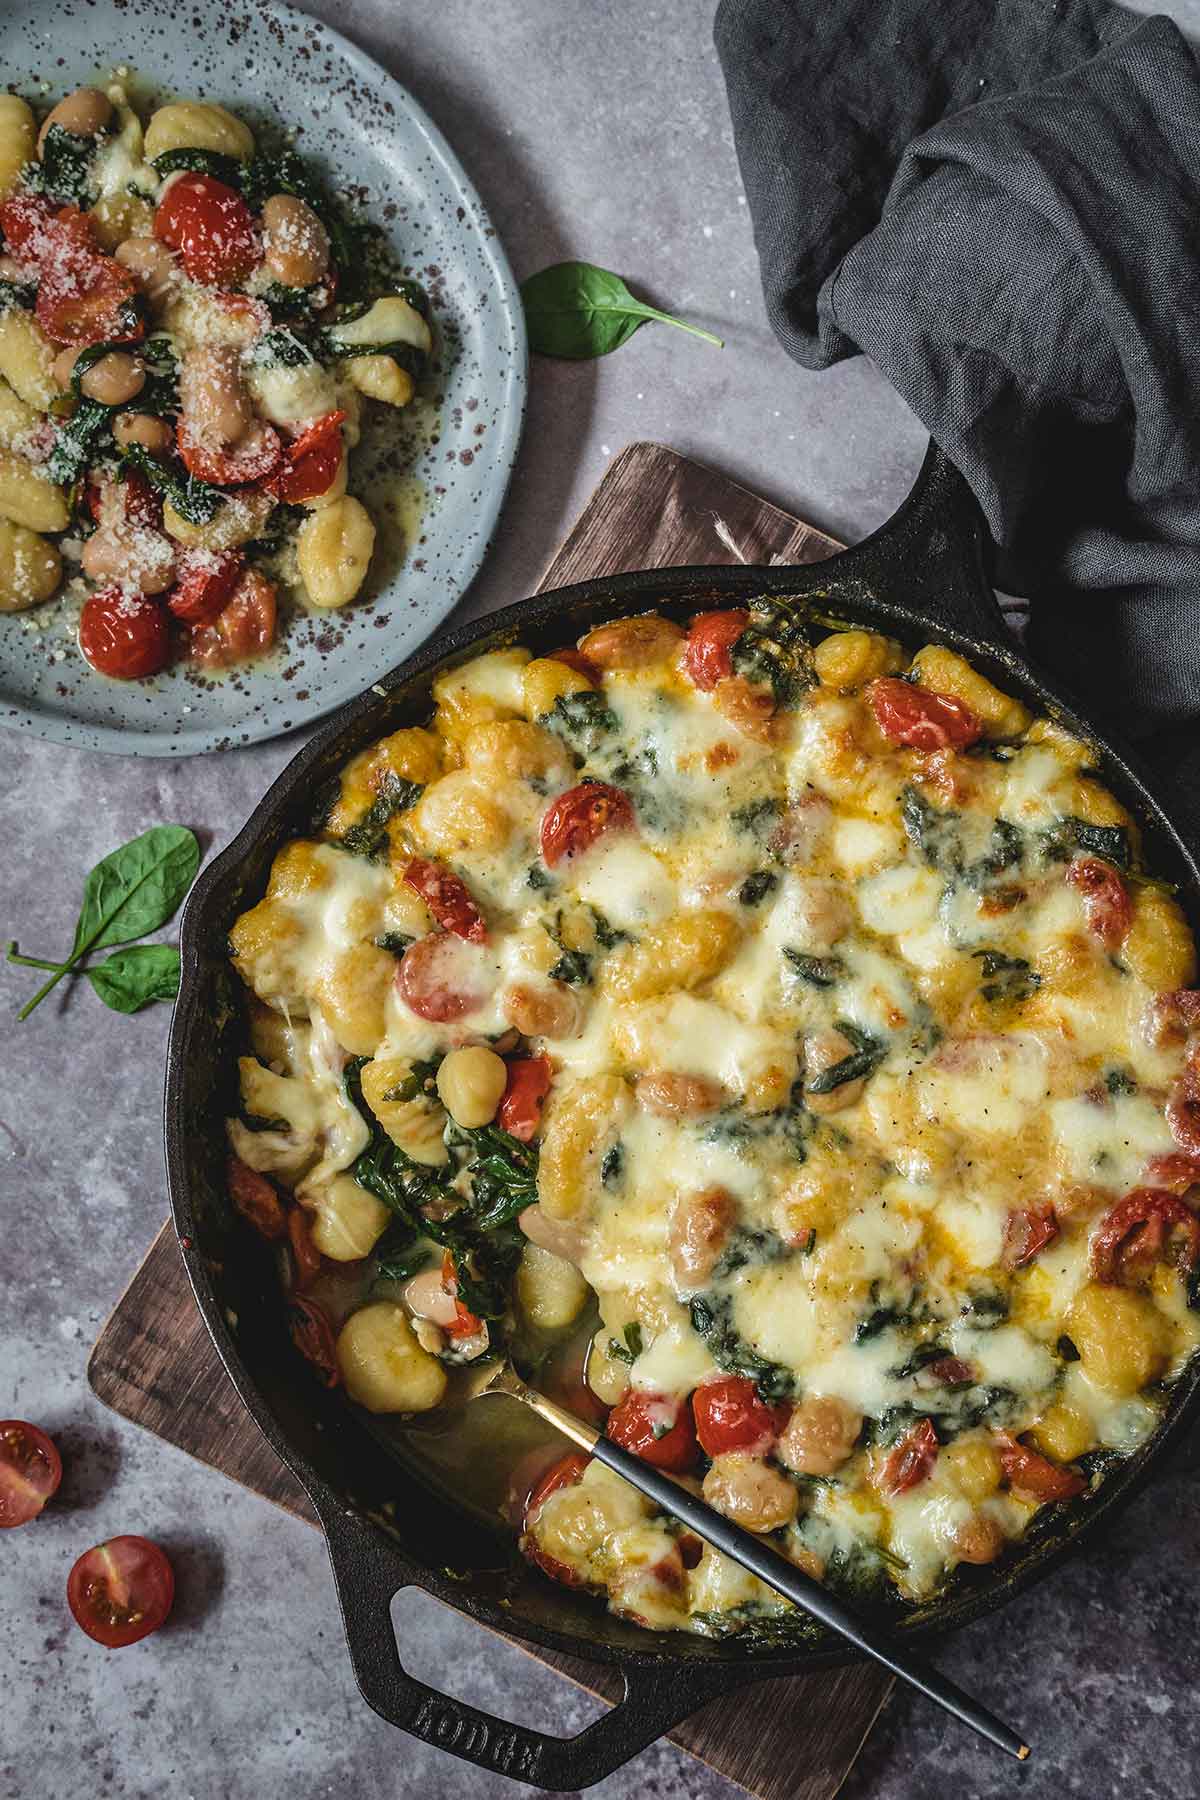 Baked gnocchi with spinach and tomatoes